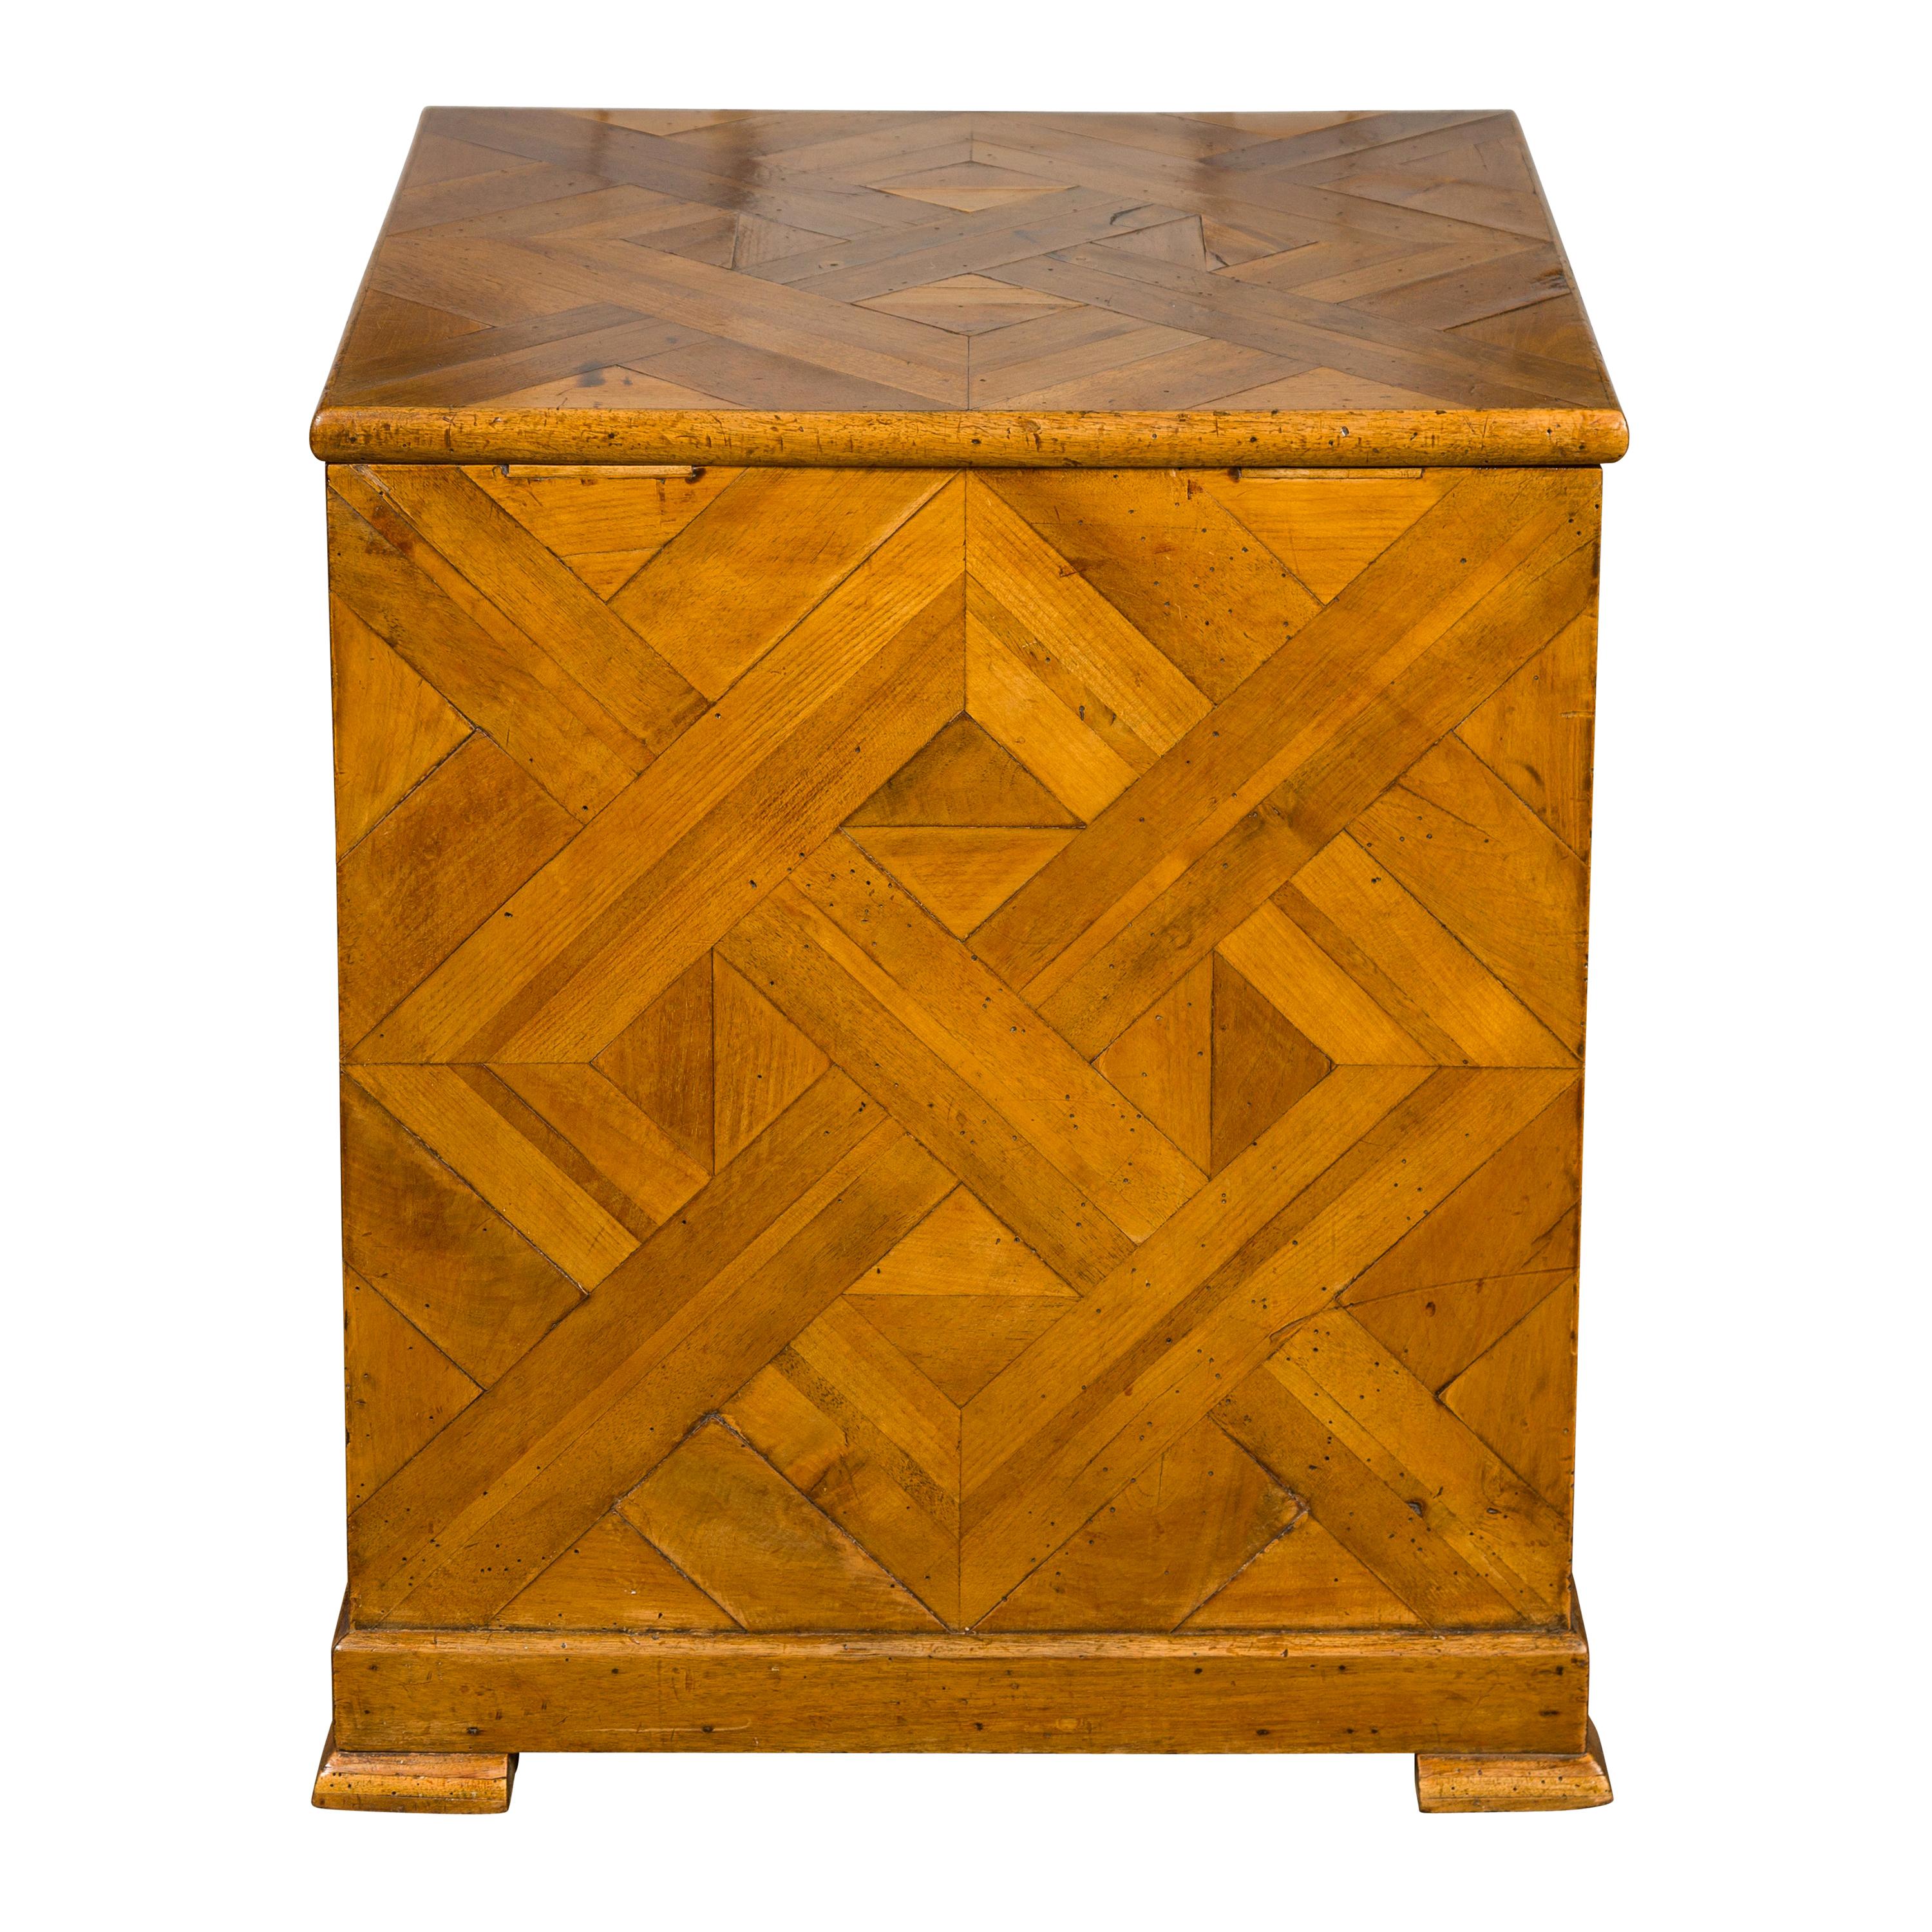 Large Italian 1820s Walnut Box with Parquetry Decor and Inner Wicker Basket